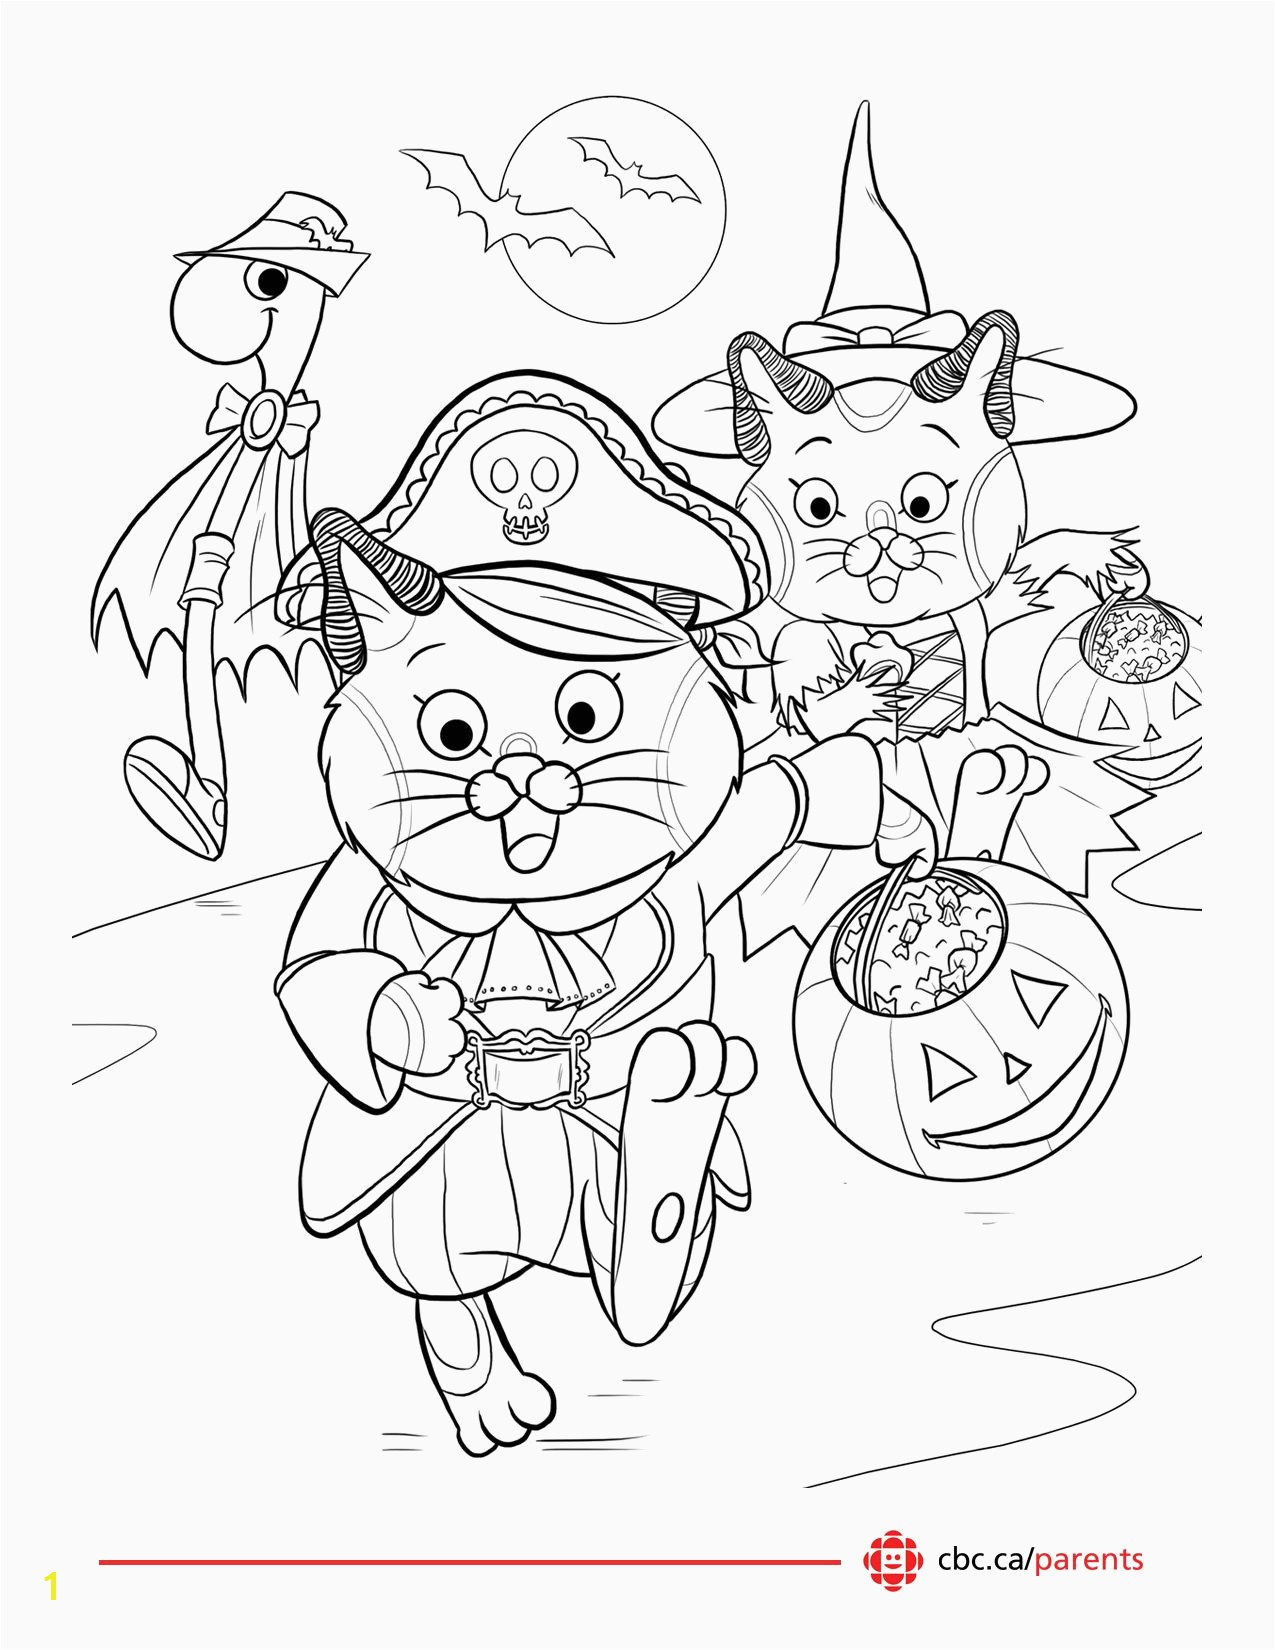 Cat Coloring Page Cat Coloring Pages Printable Fresh Best Od Dog Coloring Pages Free